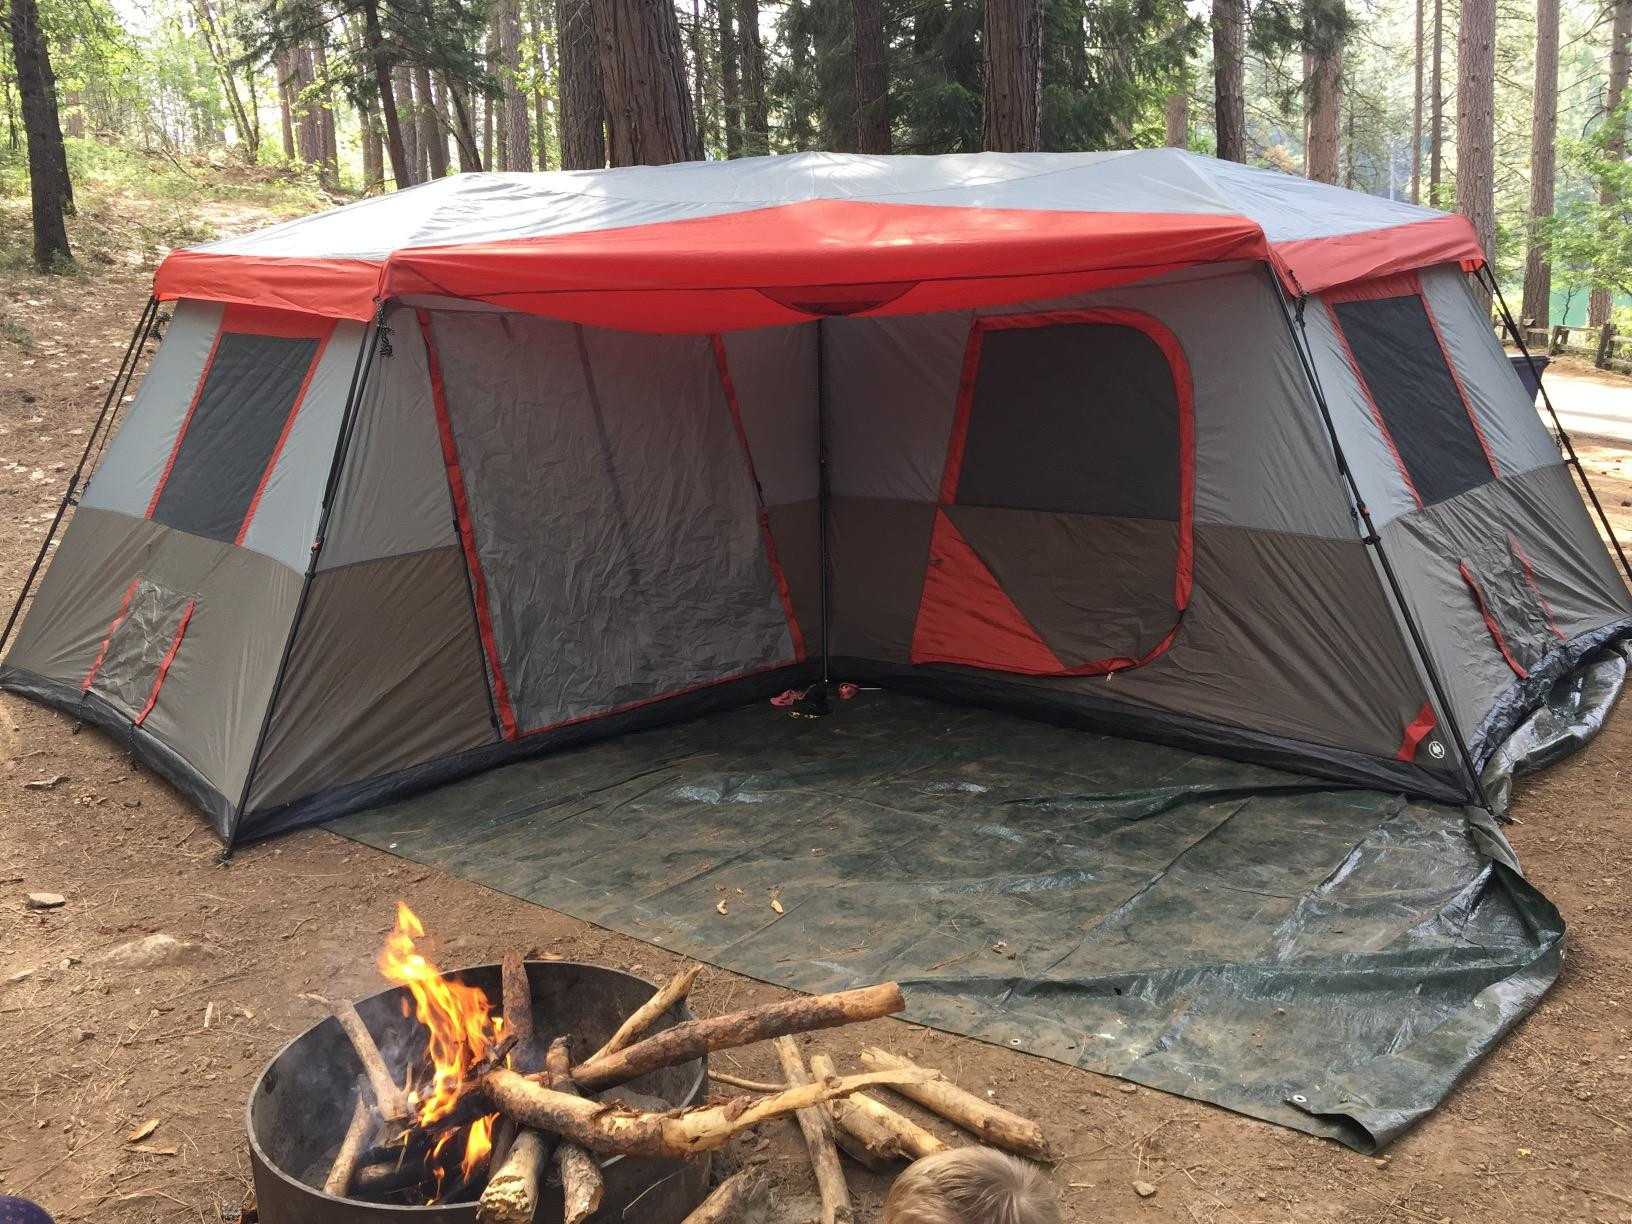 Inflatable 16x16 Tent